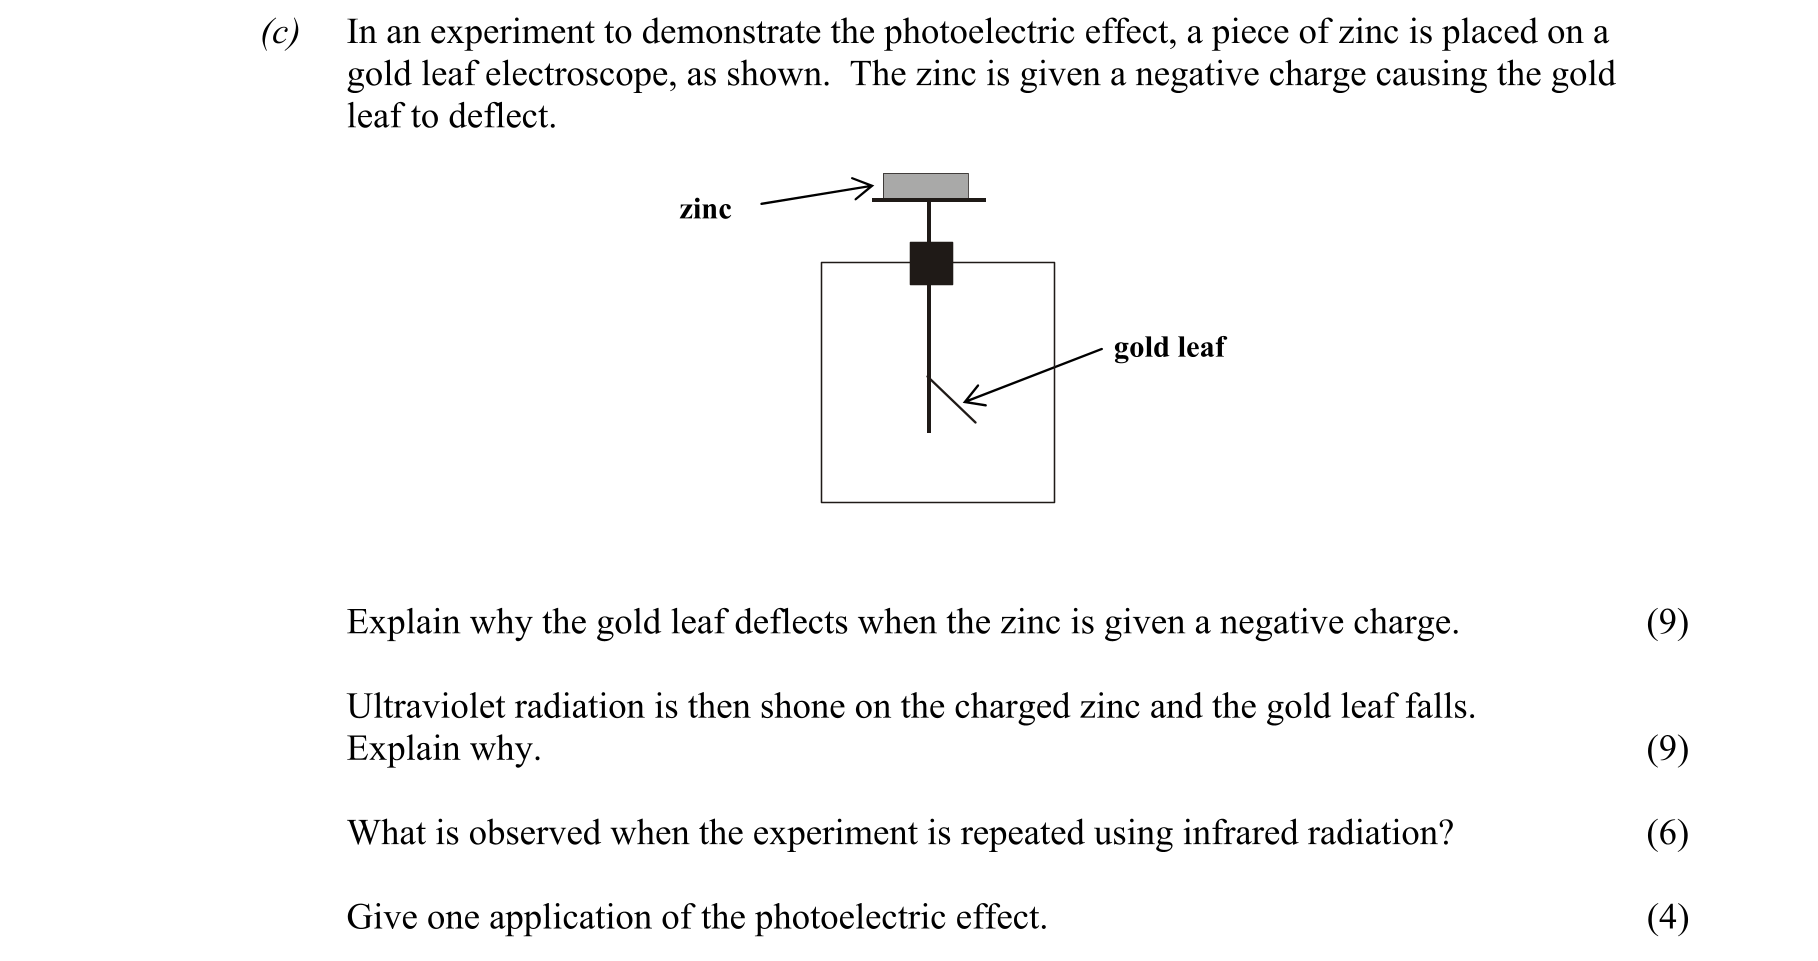 gold leaf electroscope photoelectric effect